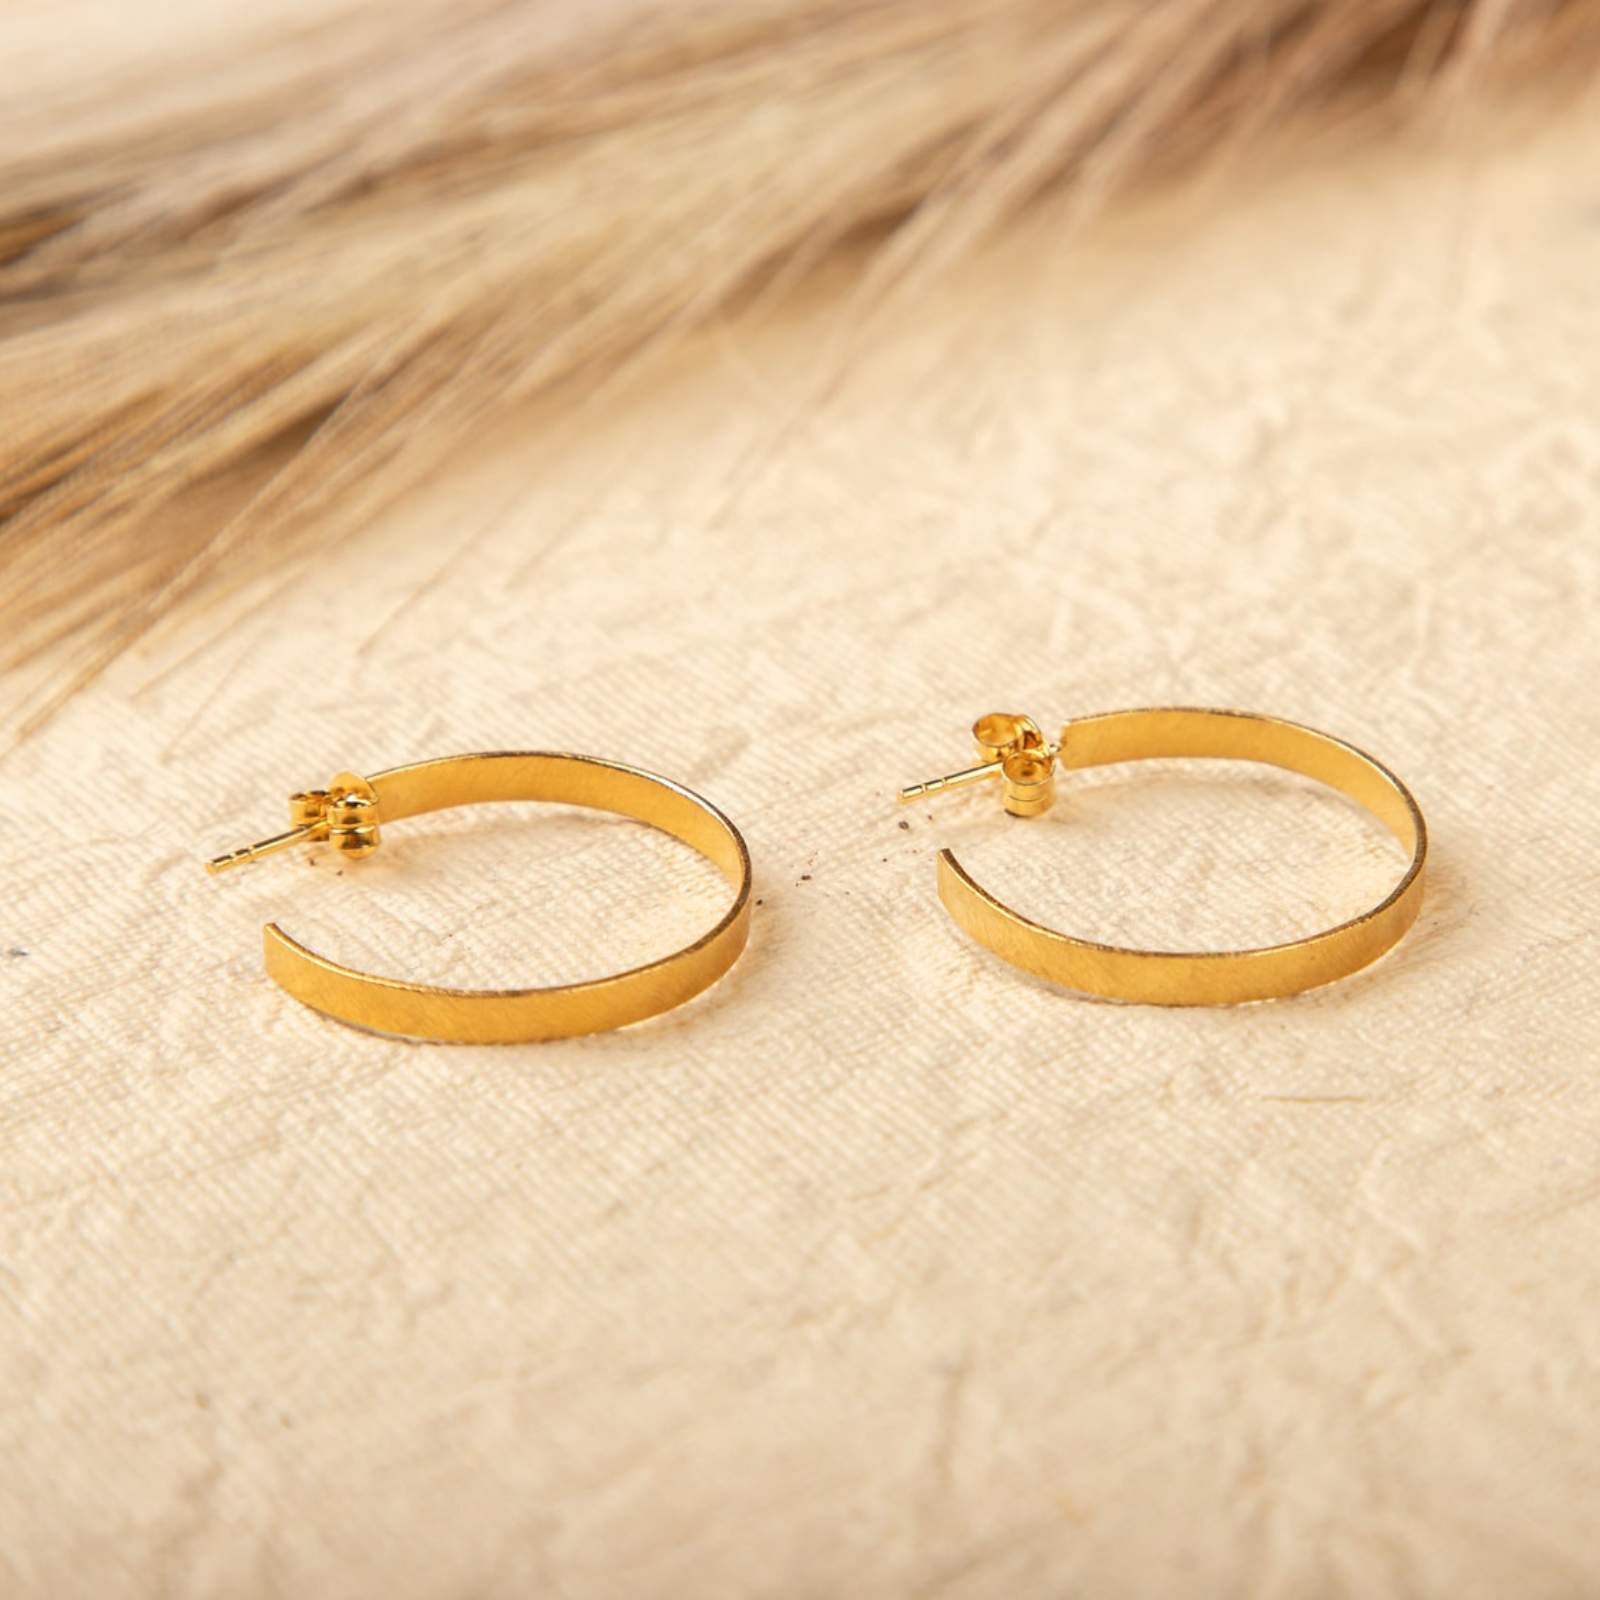 Buy Astonishing Hammered Gold Hoop Earrings by STILSKII at Ogaan Market  Online Shopping Site